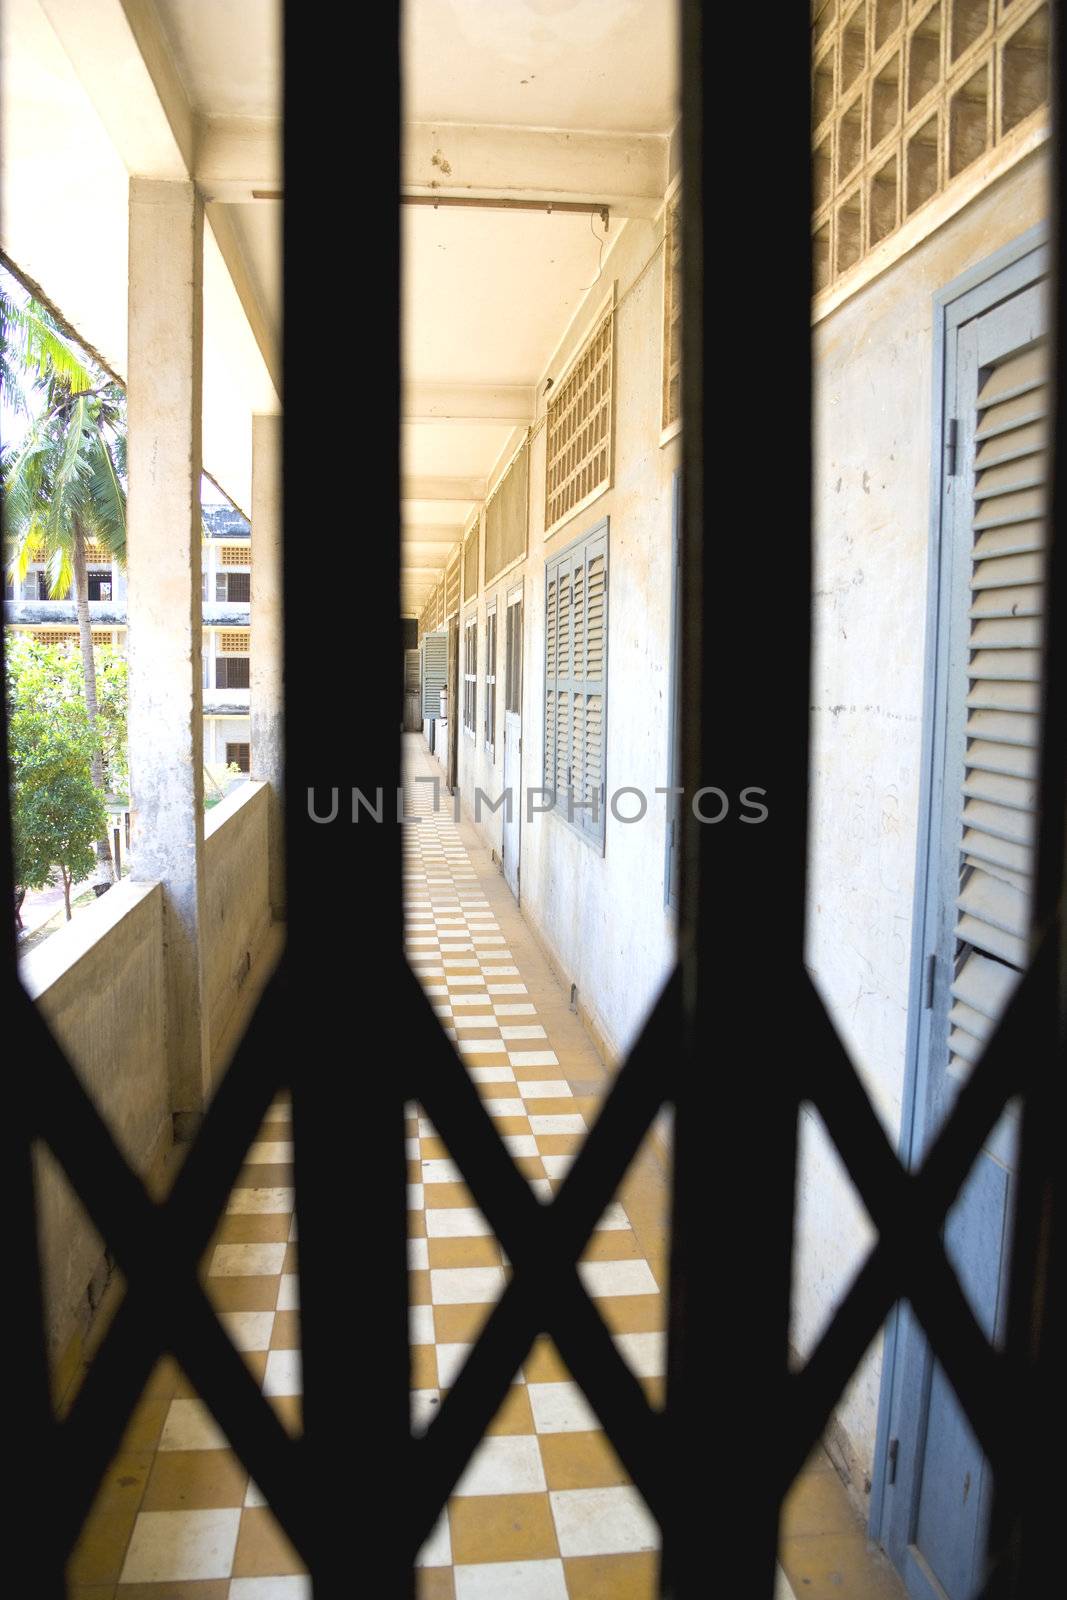 This is the actual prisonwhere many Cambodians were tortured and murdered by the Khmer Rouge. Formerly a school, converted into what was known as the notorious Security Prison 21 (S-21). About 17,000 people were interned here and only 12 survived. Now part of the Tuol Sleng Genocide Museum and it is in the same condition as when it was found by the liberating Vietnamese forces.